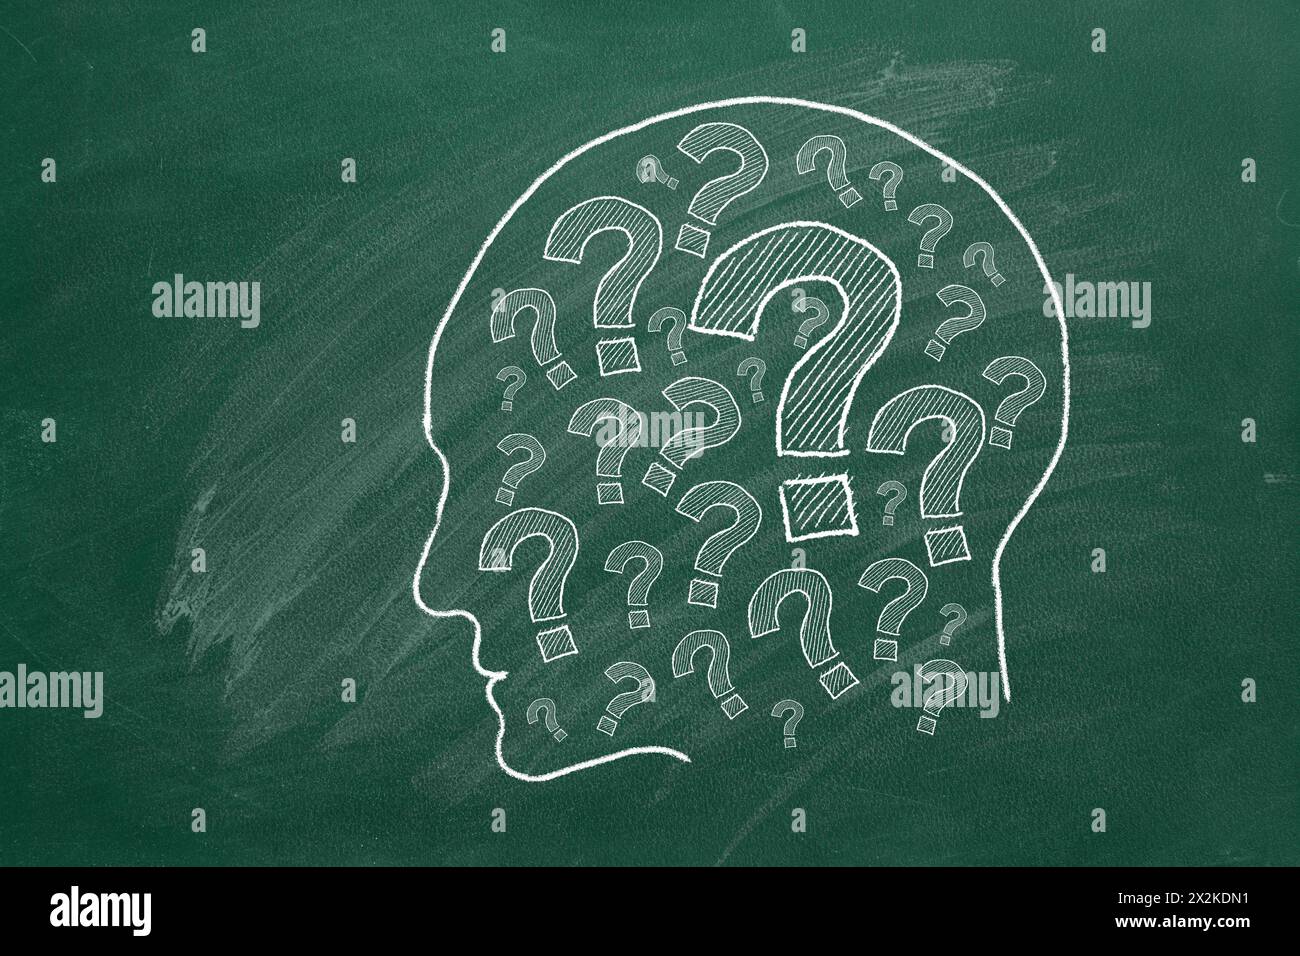 Human head with question marks inside. lustration on green chalkboard. Stock Photo